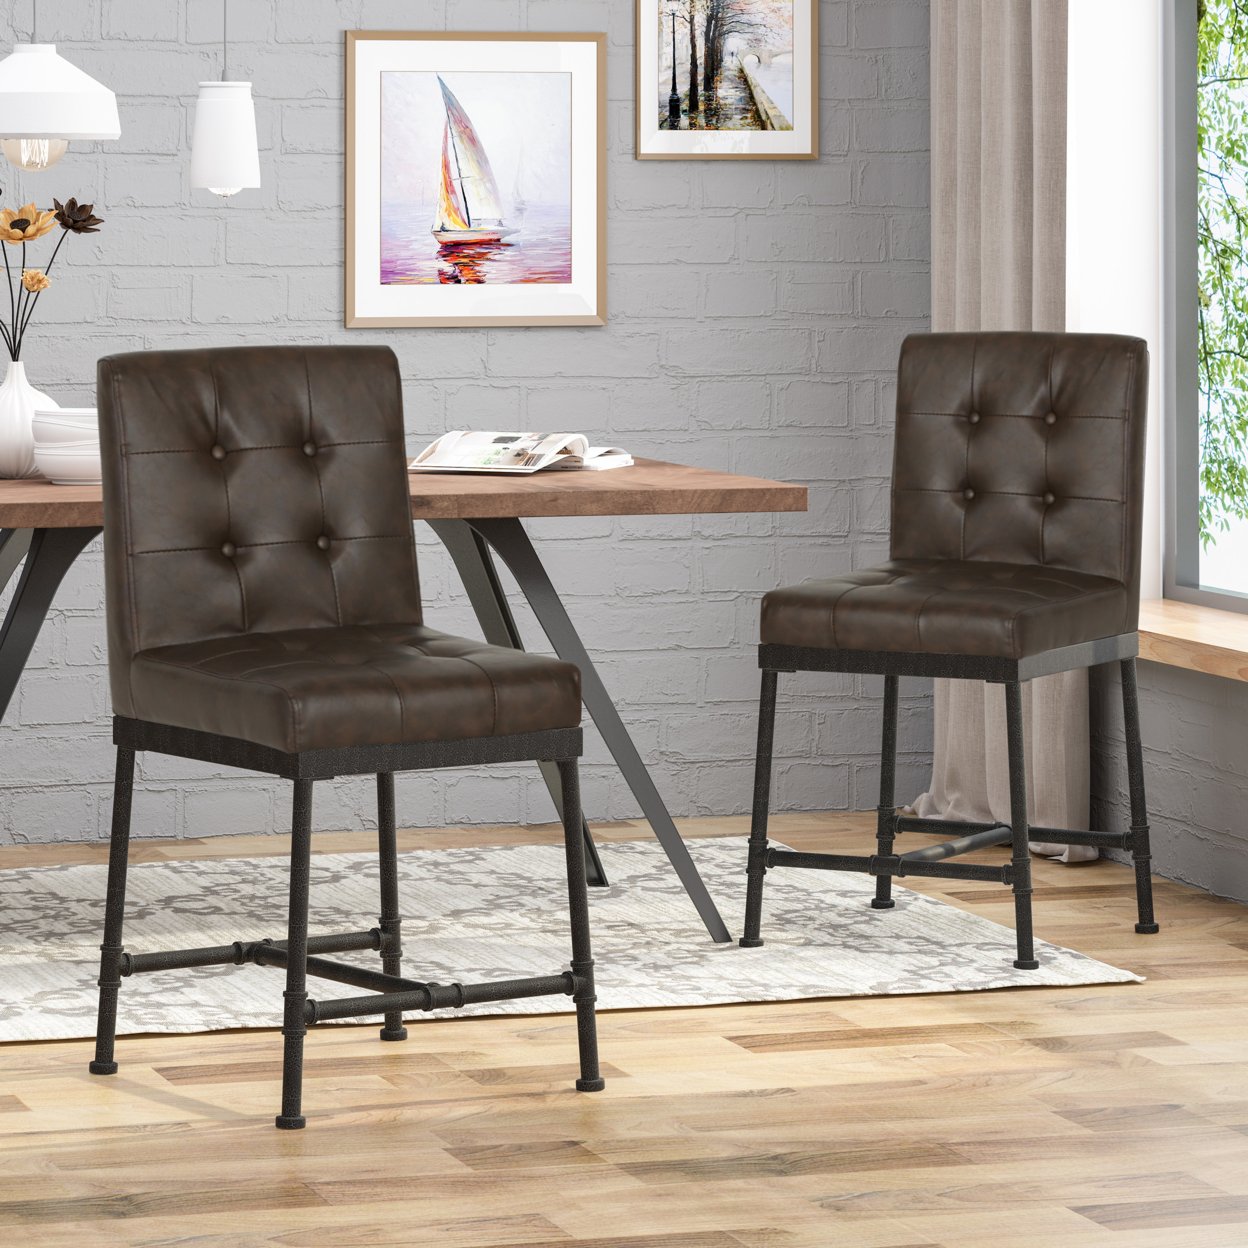 Savannah Industrial Modern 24 Counter Stool With Faux Leather Backing And Metal Pipe Base (Set Of 2) - Dark Brown + Black